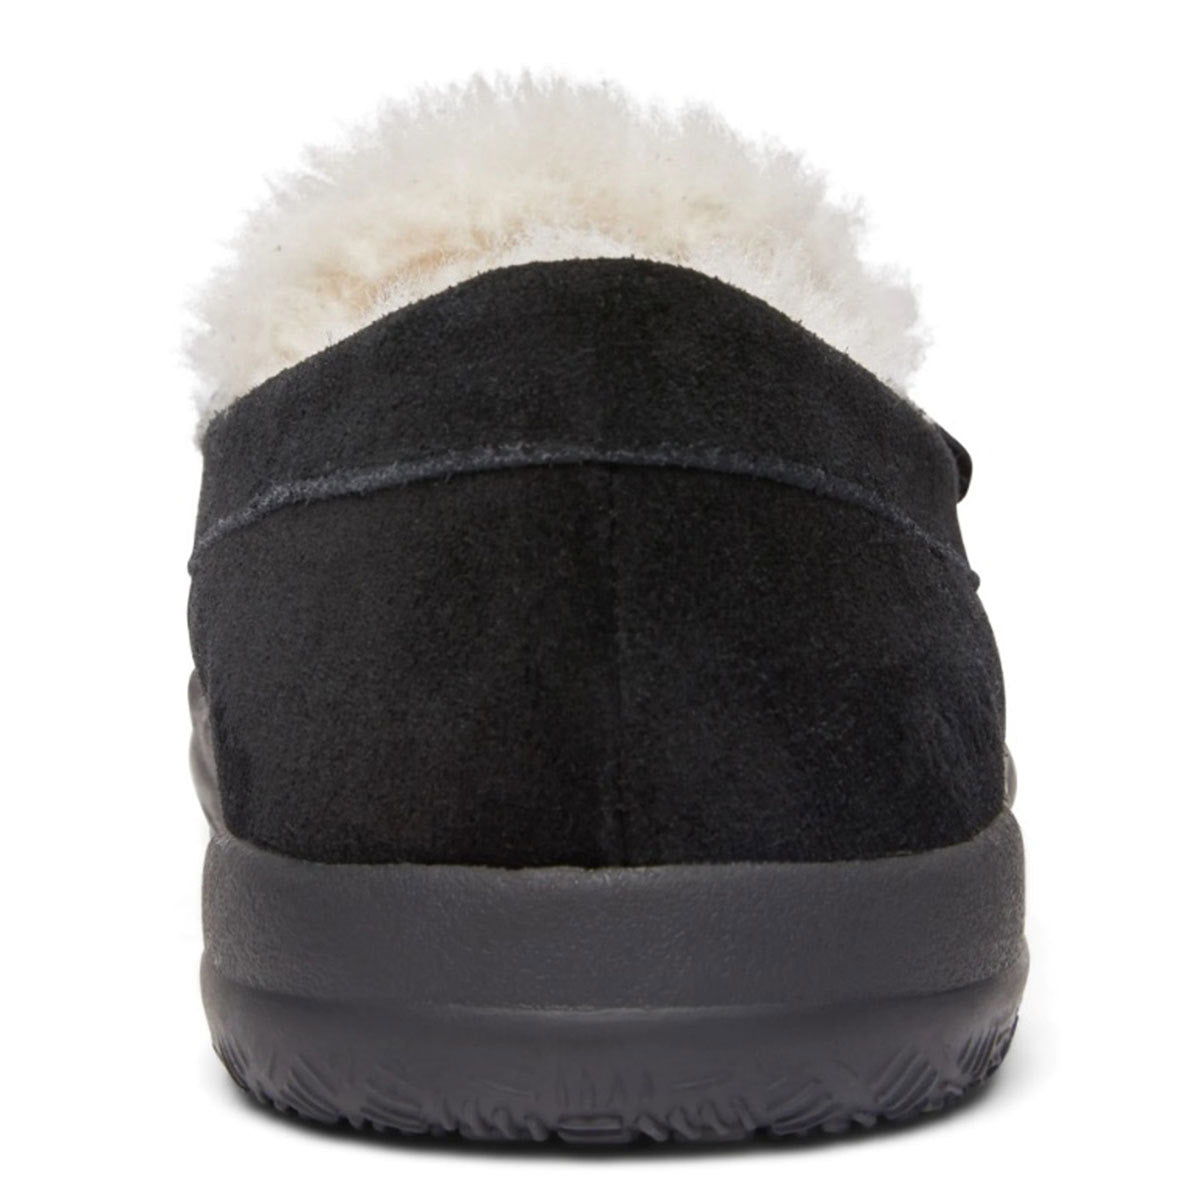 Black Vionic Lynez slipper with fluffy lining viewed from the rear, featuring a biomechanical footbed.